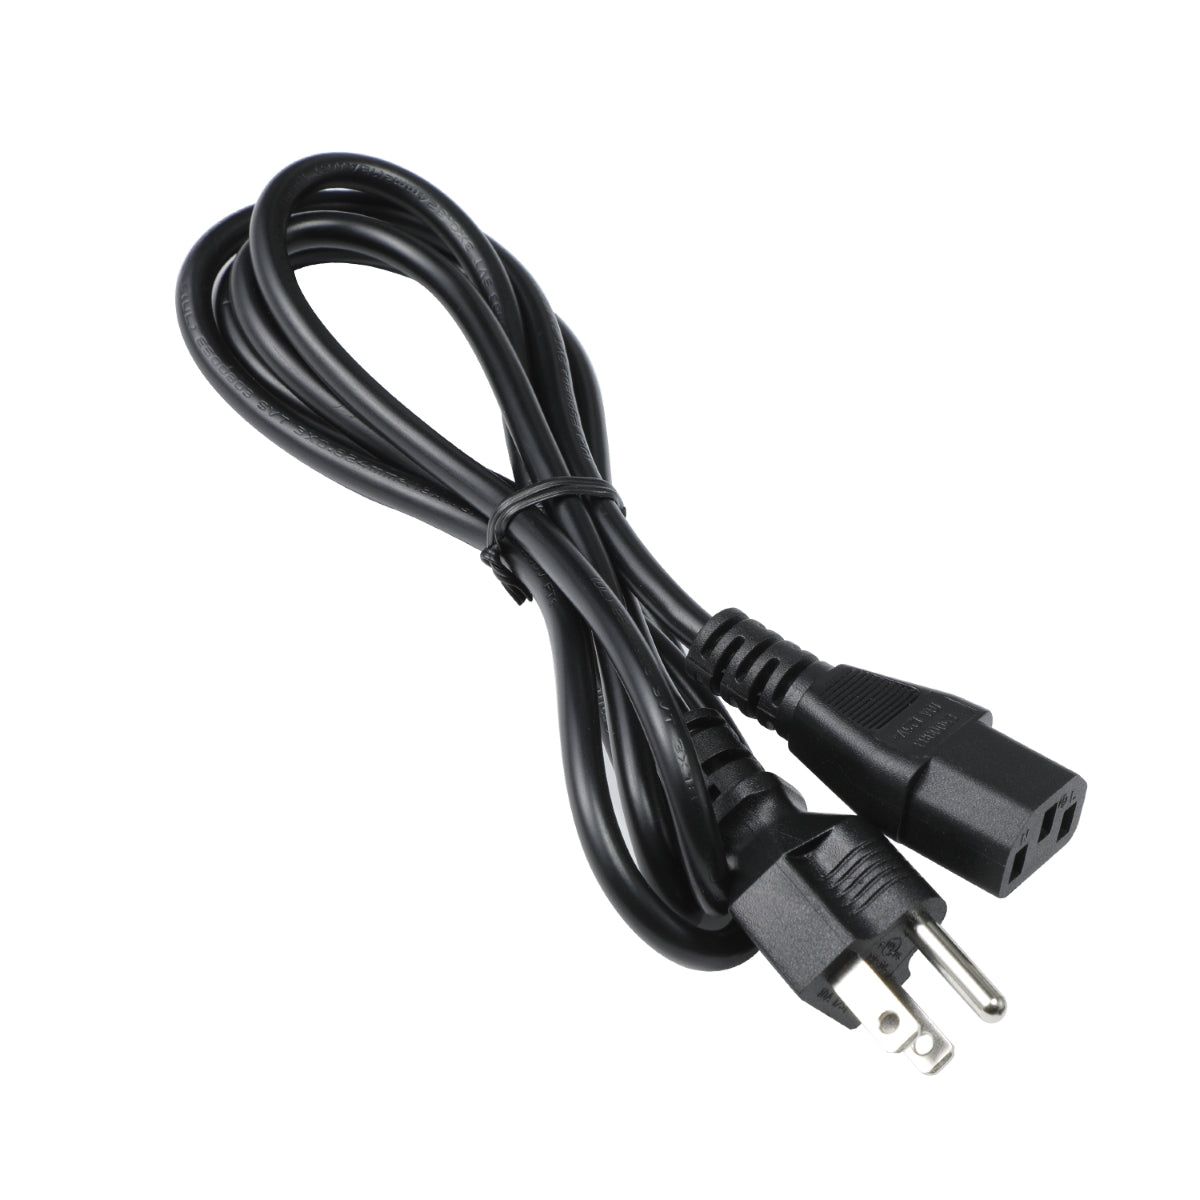 Power Cable for Philips 436M6VBPAB 4K Display.